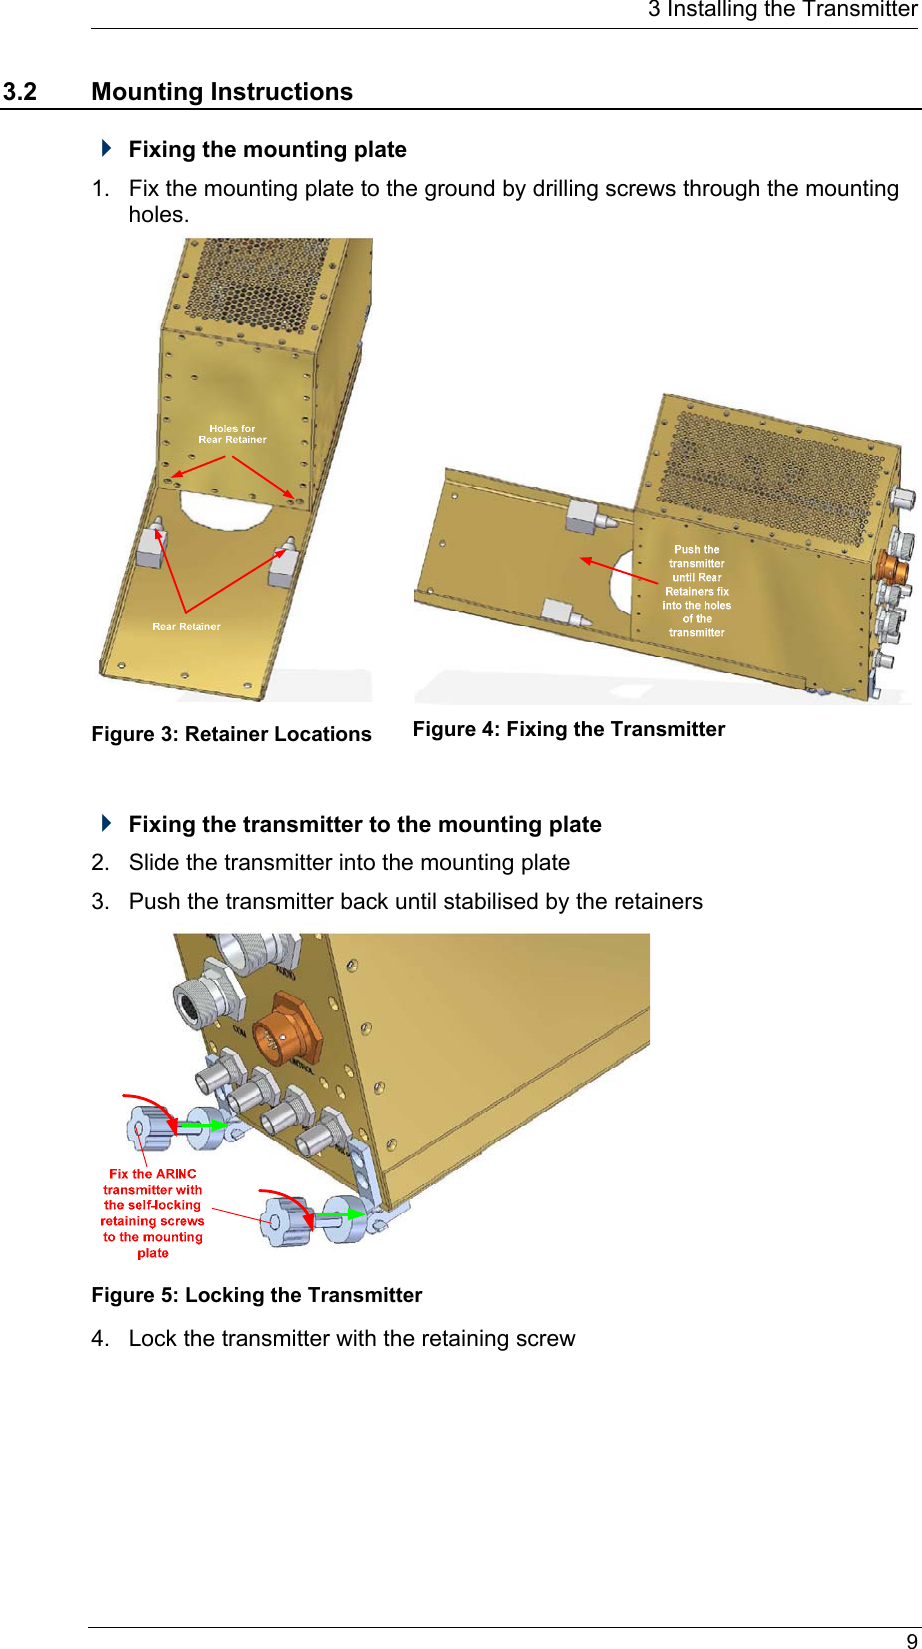   9    3 Installing the Transmitter3.2 Mounting Instructions  Fixing the mounting plate 1.  Fix the mounting plate to the ground by drilling screws through the mounting holes.  Figure 3: Retainer Locations      Figure 4: Fixing the Transmitter   Fixing the transmitter to the mounting plate  2.  Slide the transmitter into the mounting plate 3.  Push the transmitter back until stabilised by the retainers  Figure 5: Locking the Transmitter 4.  Lock the transmitter with the retaining screw 